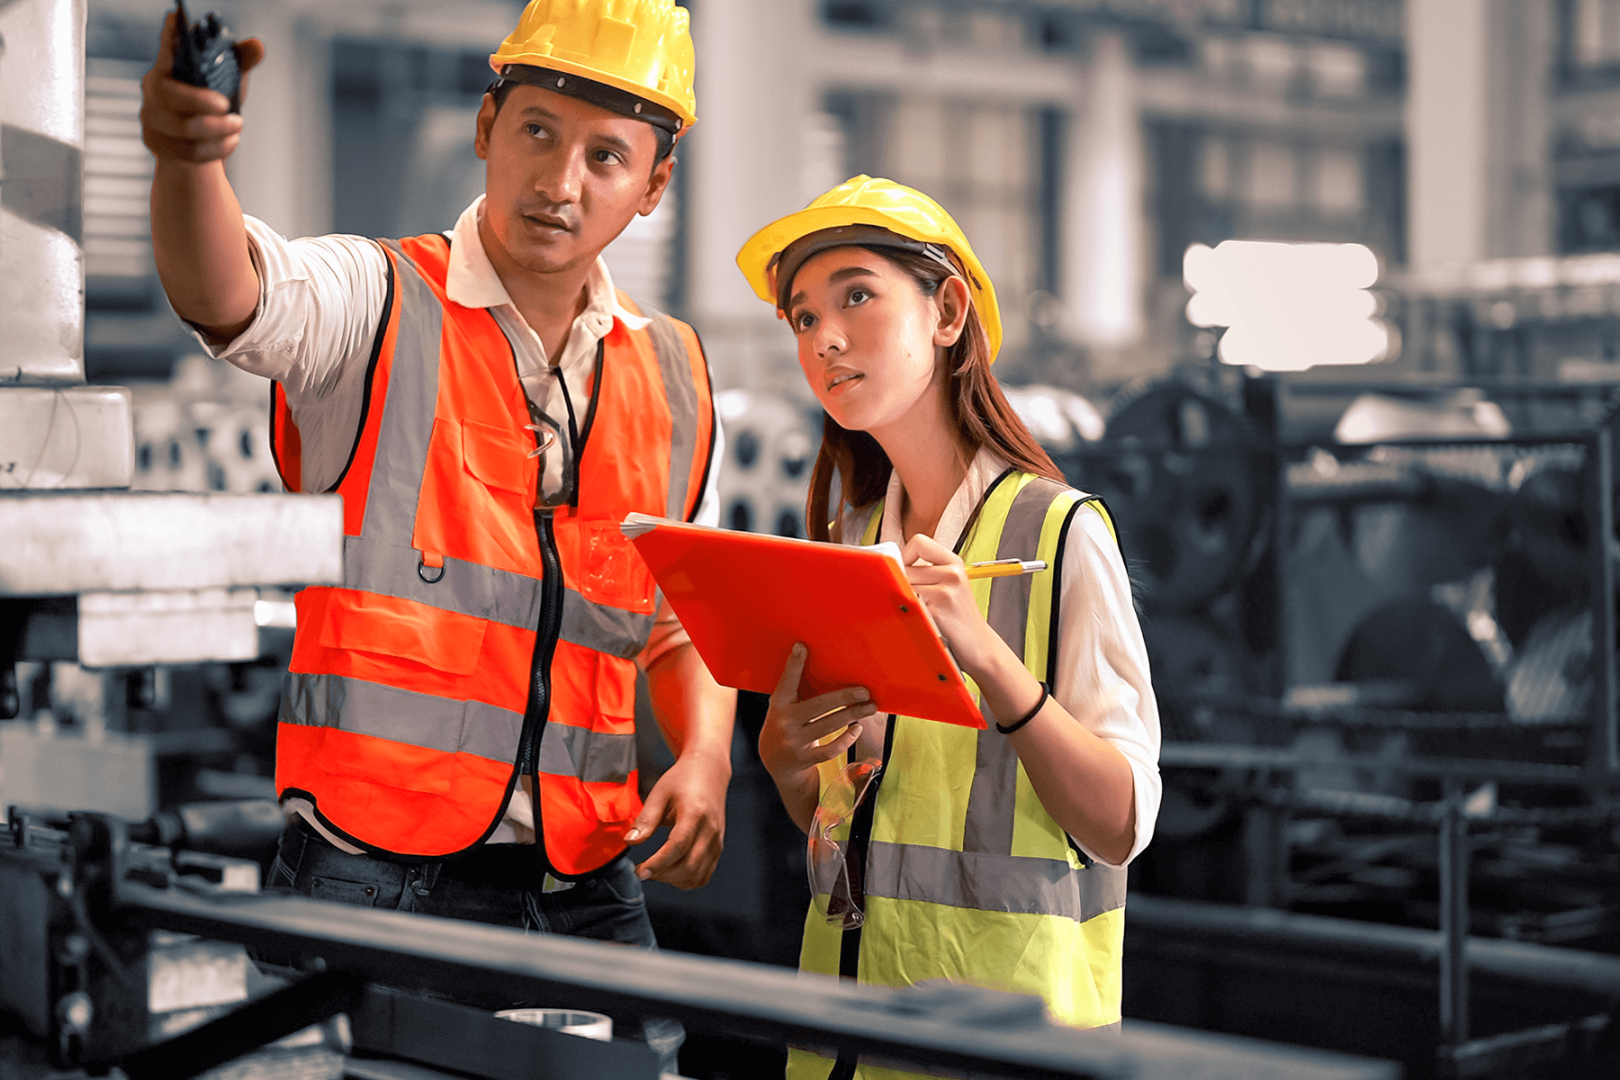 Here's What to Expect During an OSHA Inspection